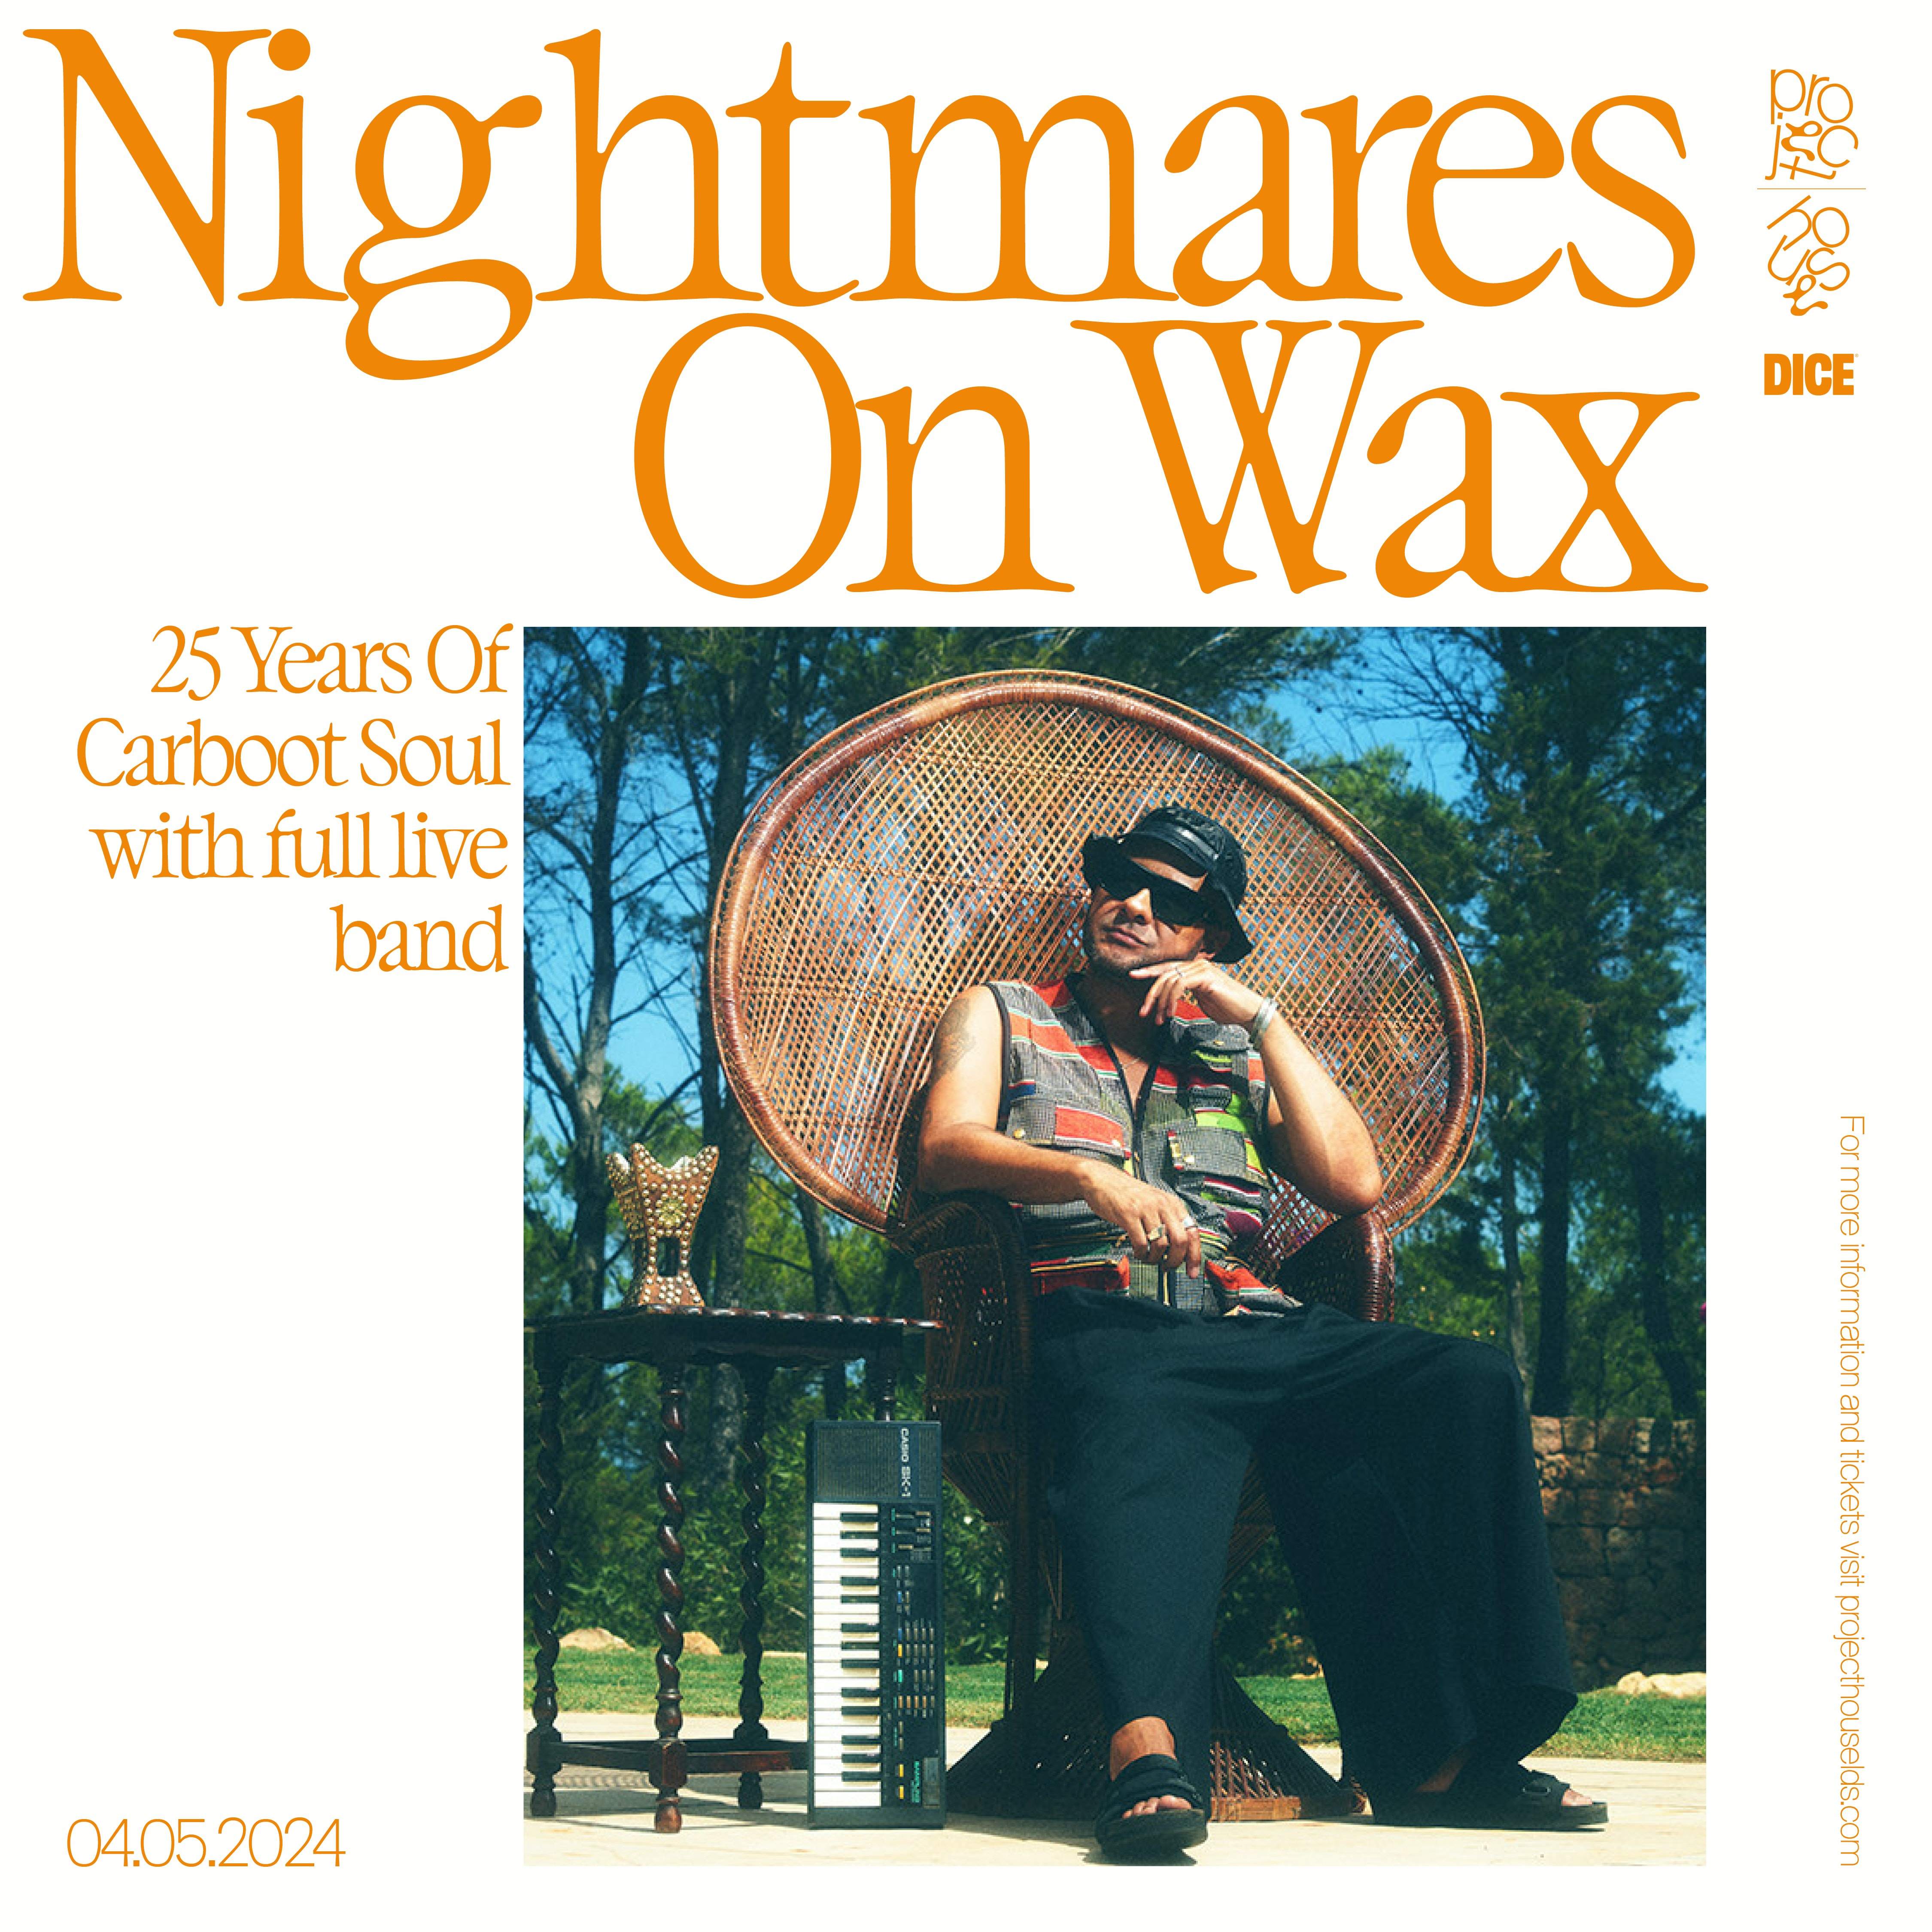 Nightmares on Wax 25 Years Of Carboot Soul with full live band - フライヤー表